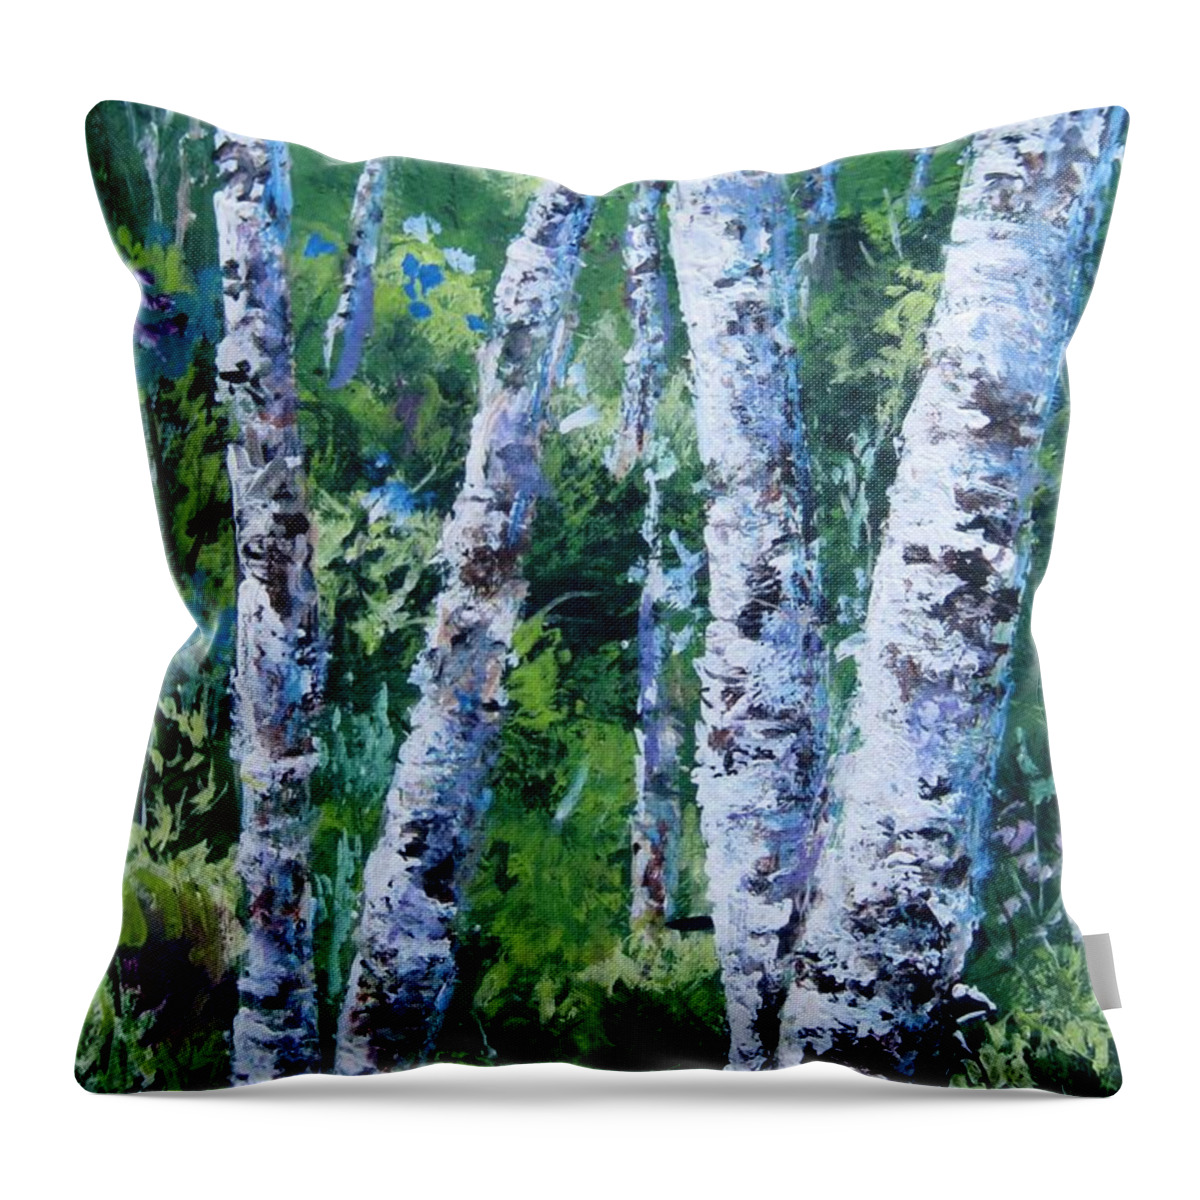 Birch Trees Throw Pillow featuring the painting The Birches by Megan Walsh